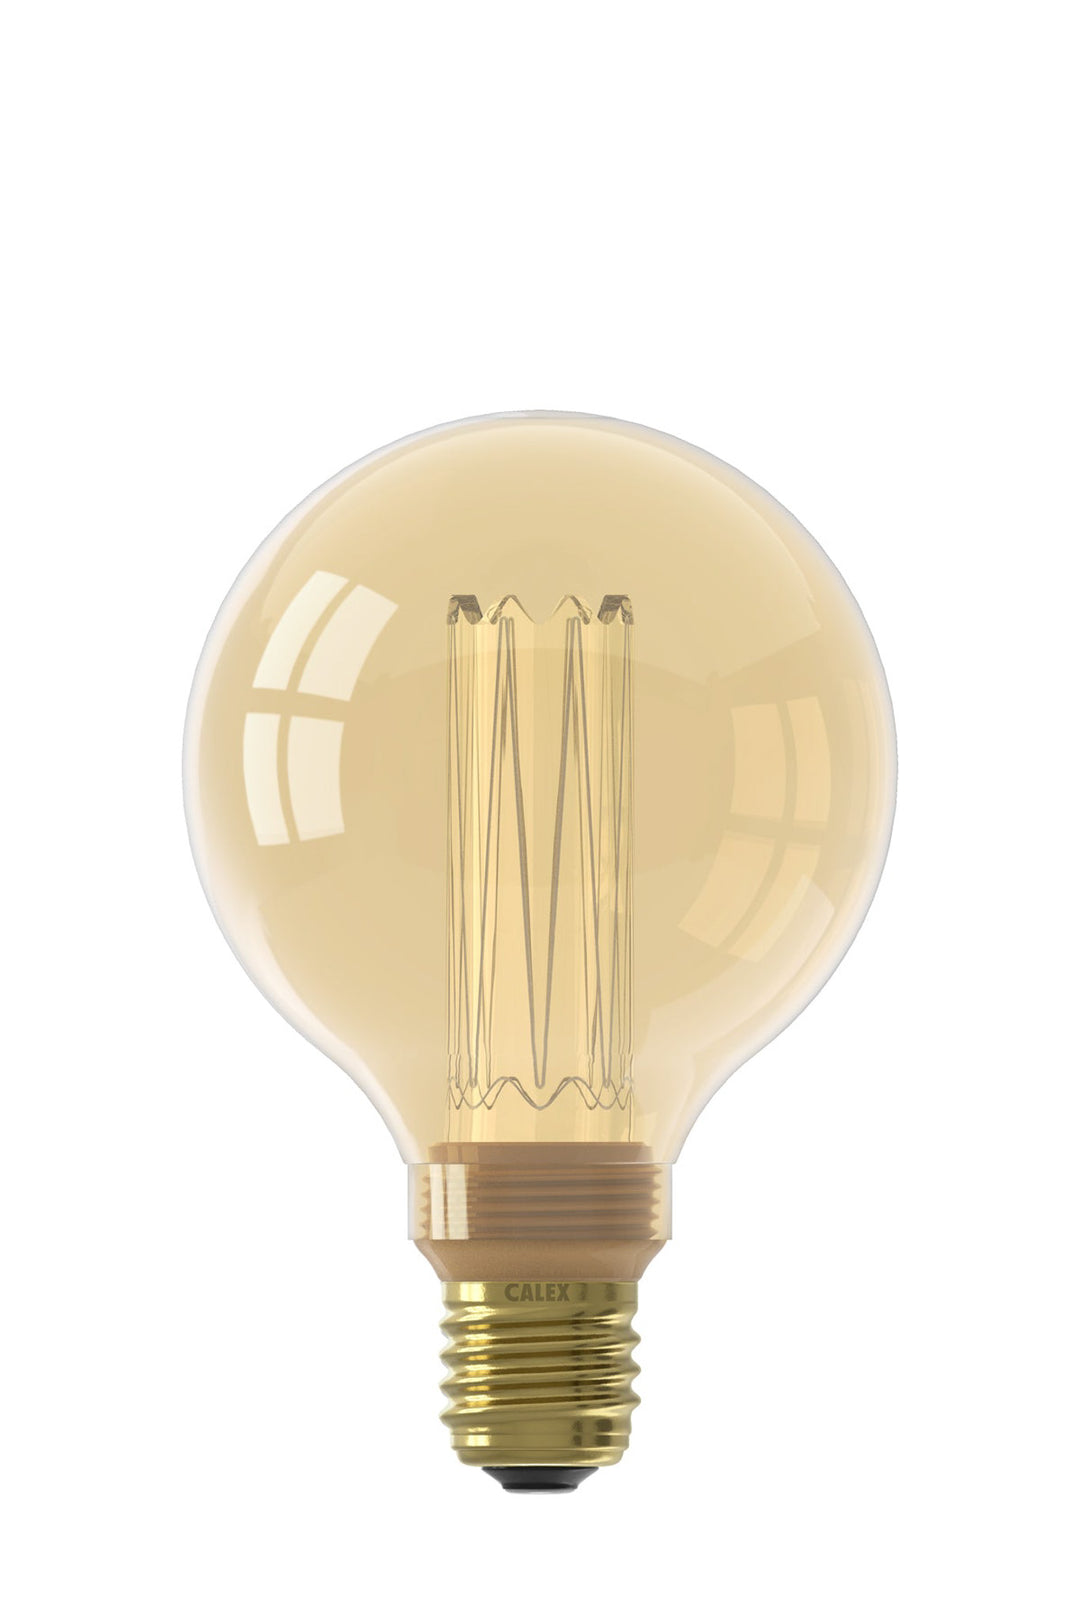 Calex LED Glass Fibre Globe G95 Gold, E27, Dimmable with LED Dimmer 1201001300